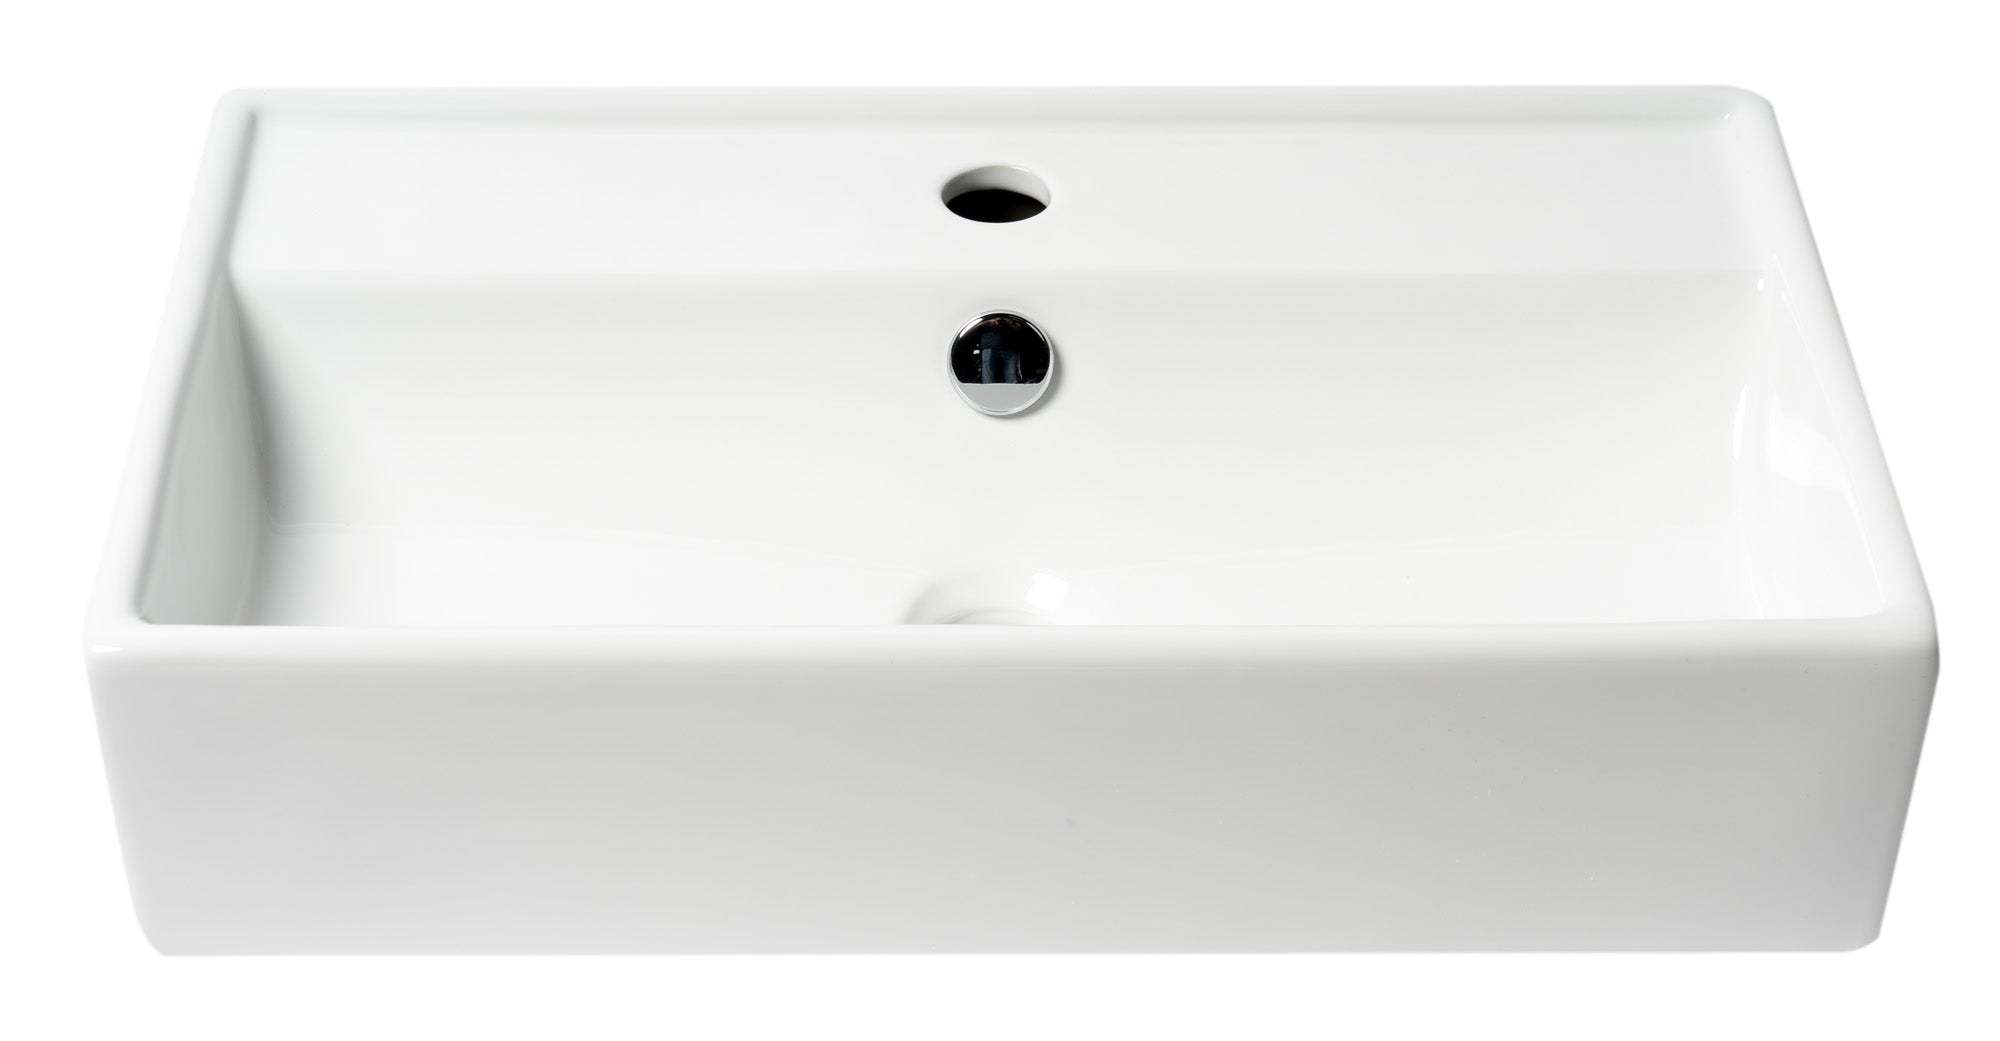 ALFI Brand - White 22" Rectangular Wall Mounted Ceramic Sink with Faucet Hole | ABC122